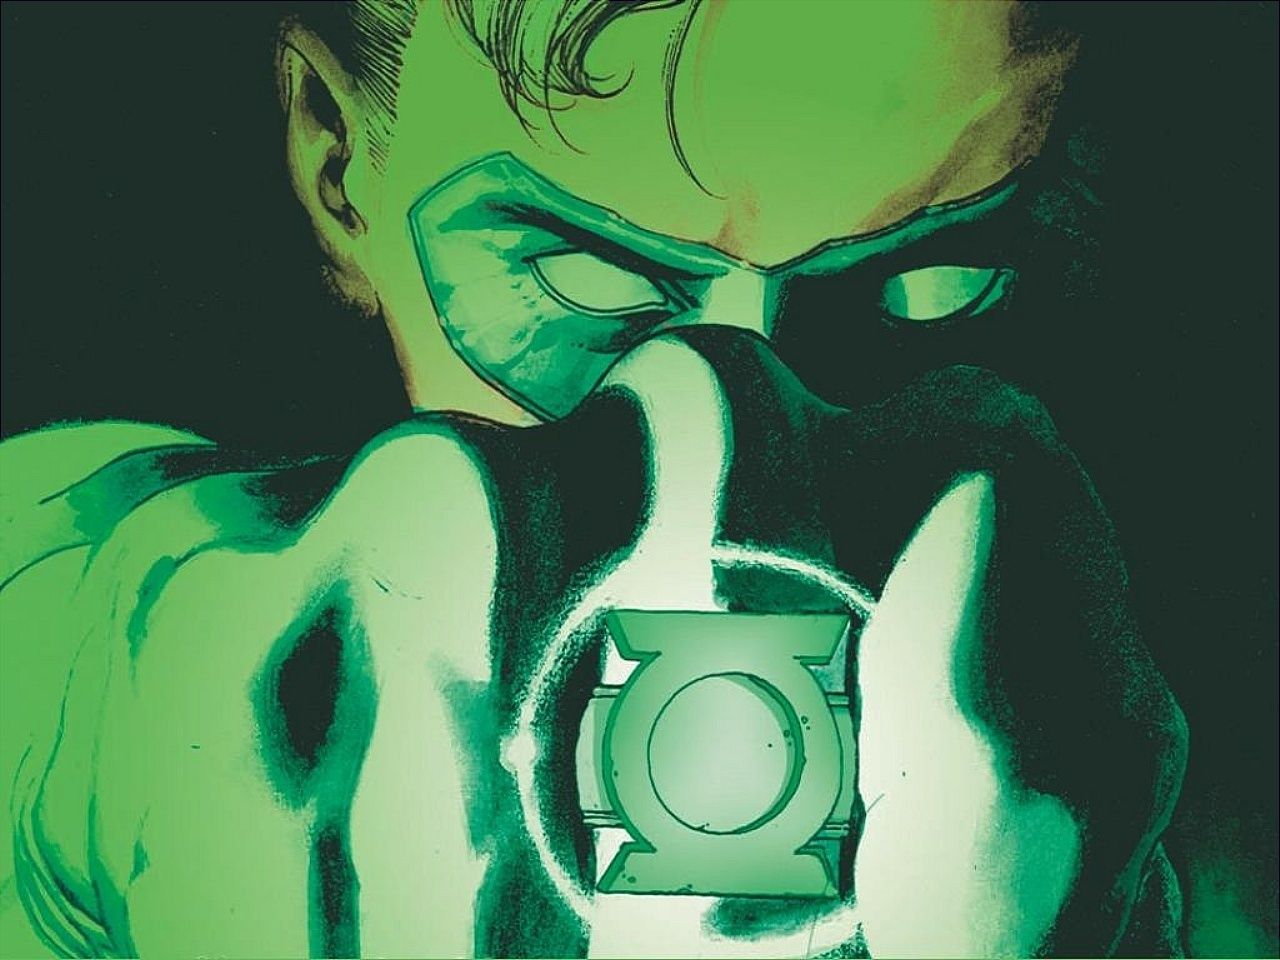 Green Lantern Corps Leads Revealed? It's the Best of Both Worlds. New Media Rockstars